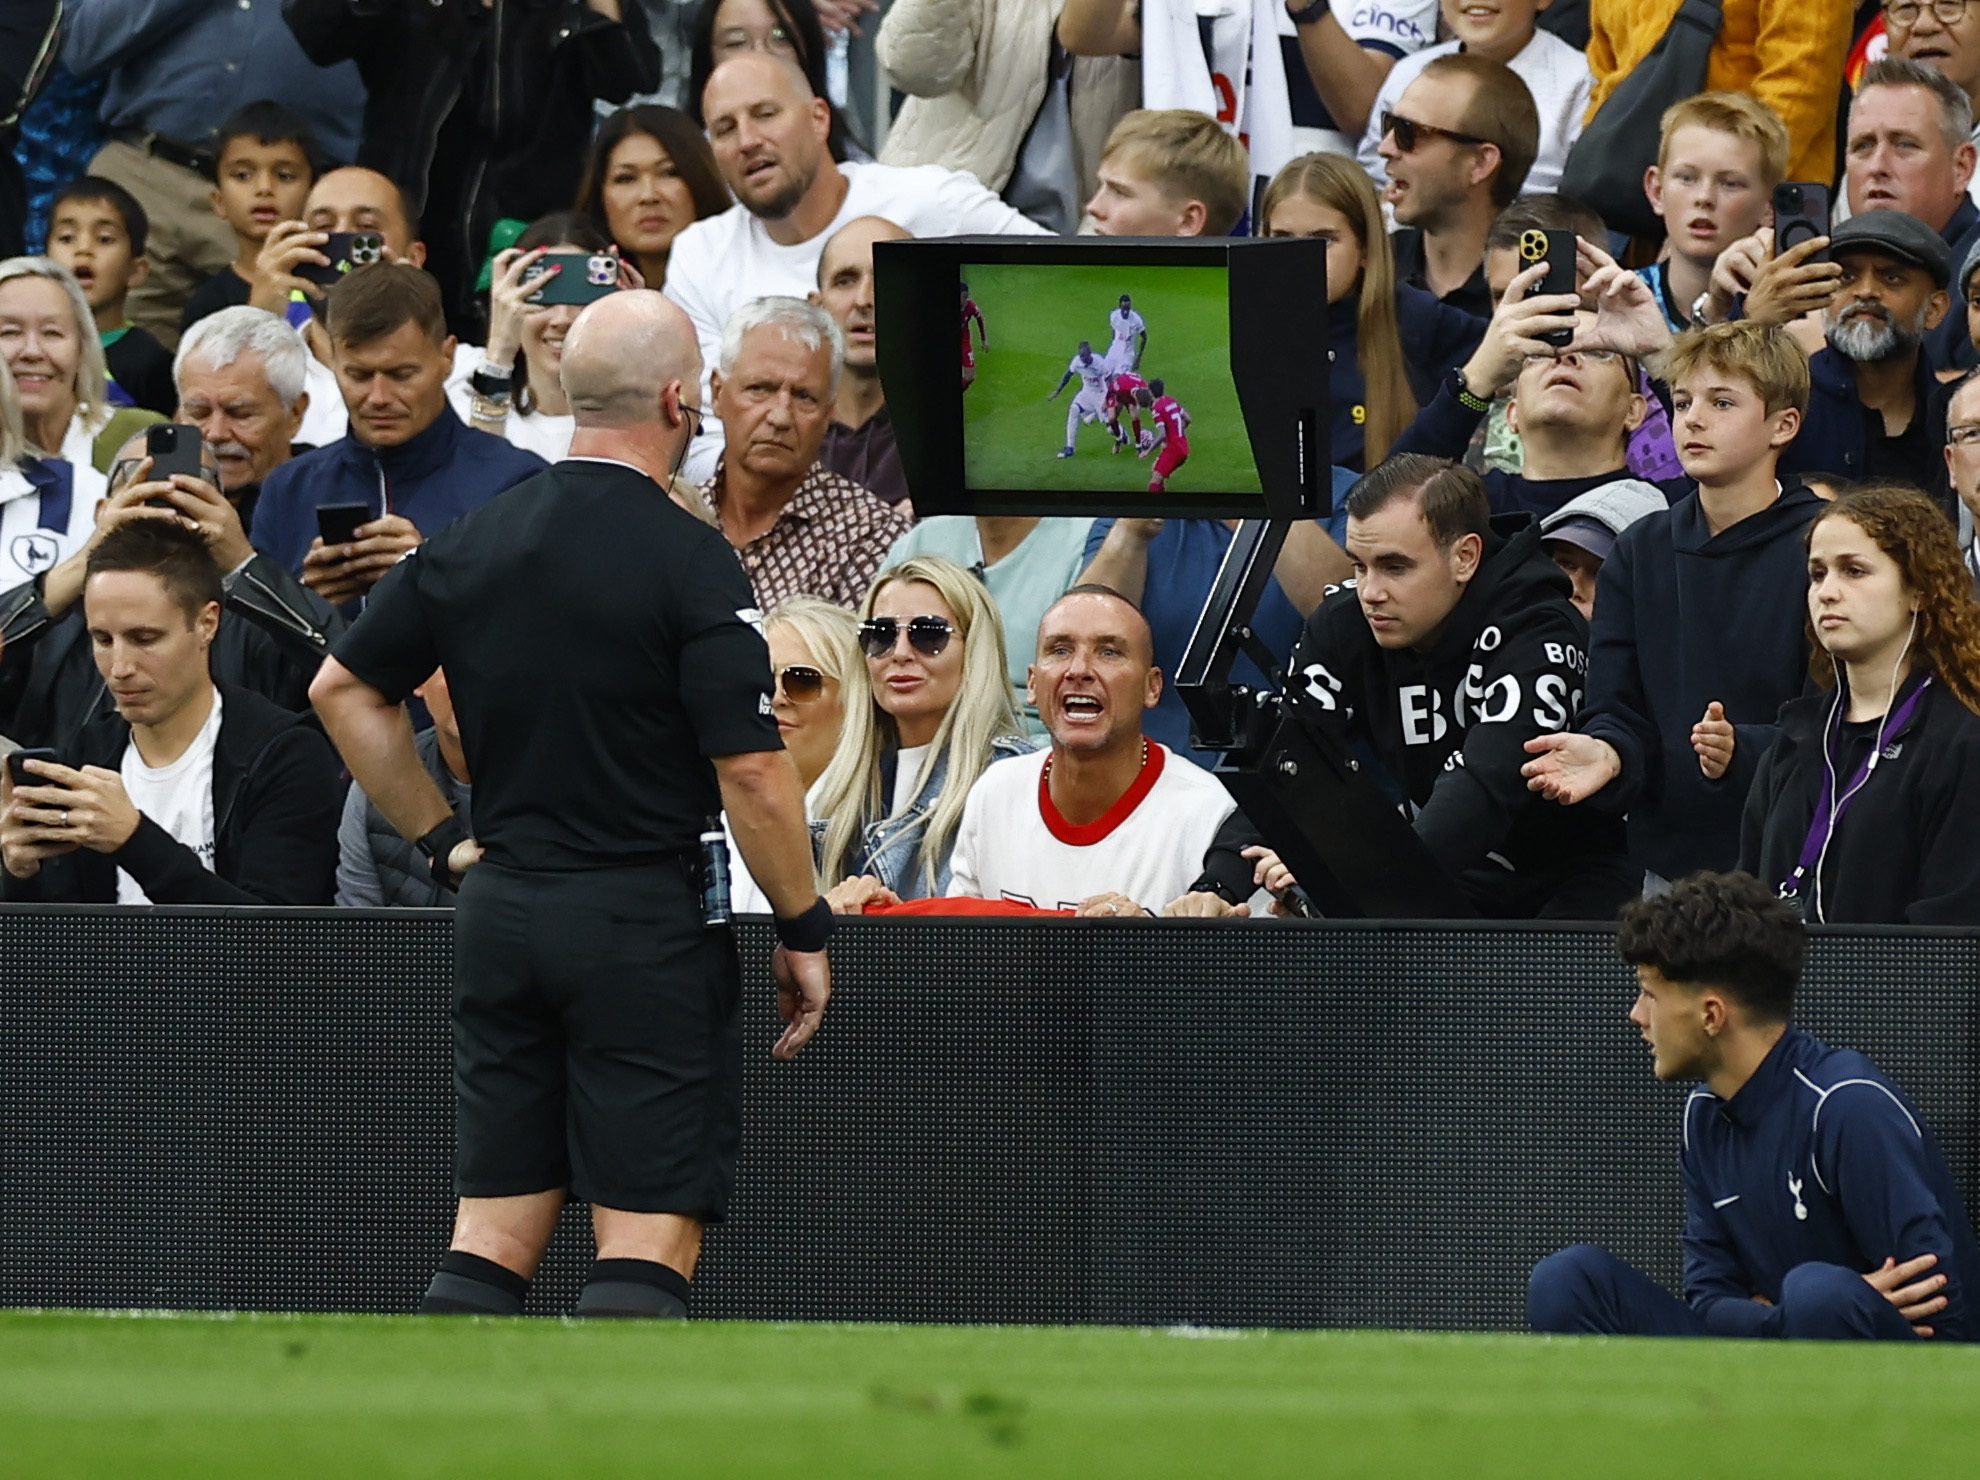 Liverpool say VAR error at Spurs undermined sporting integrity | Reuters